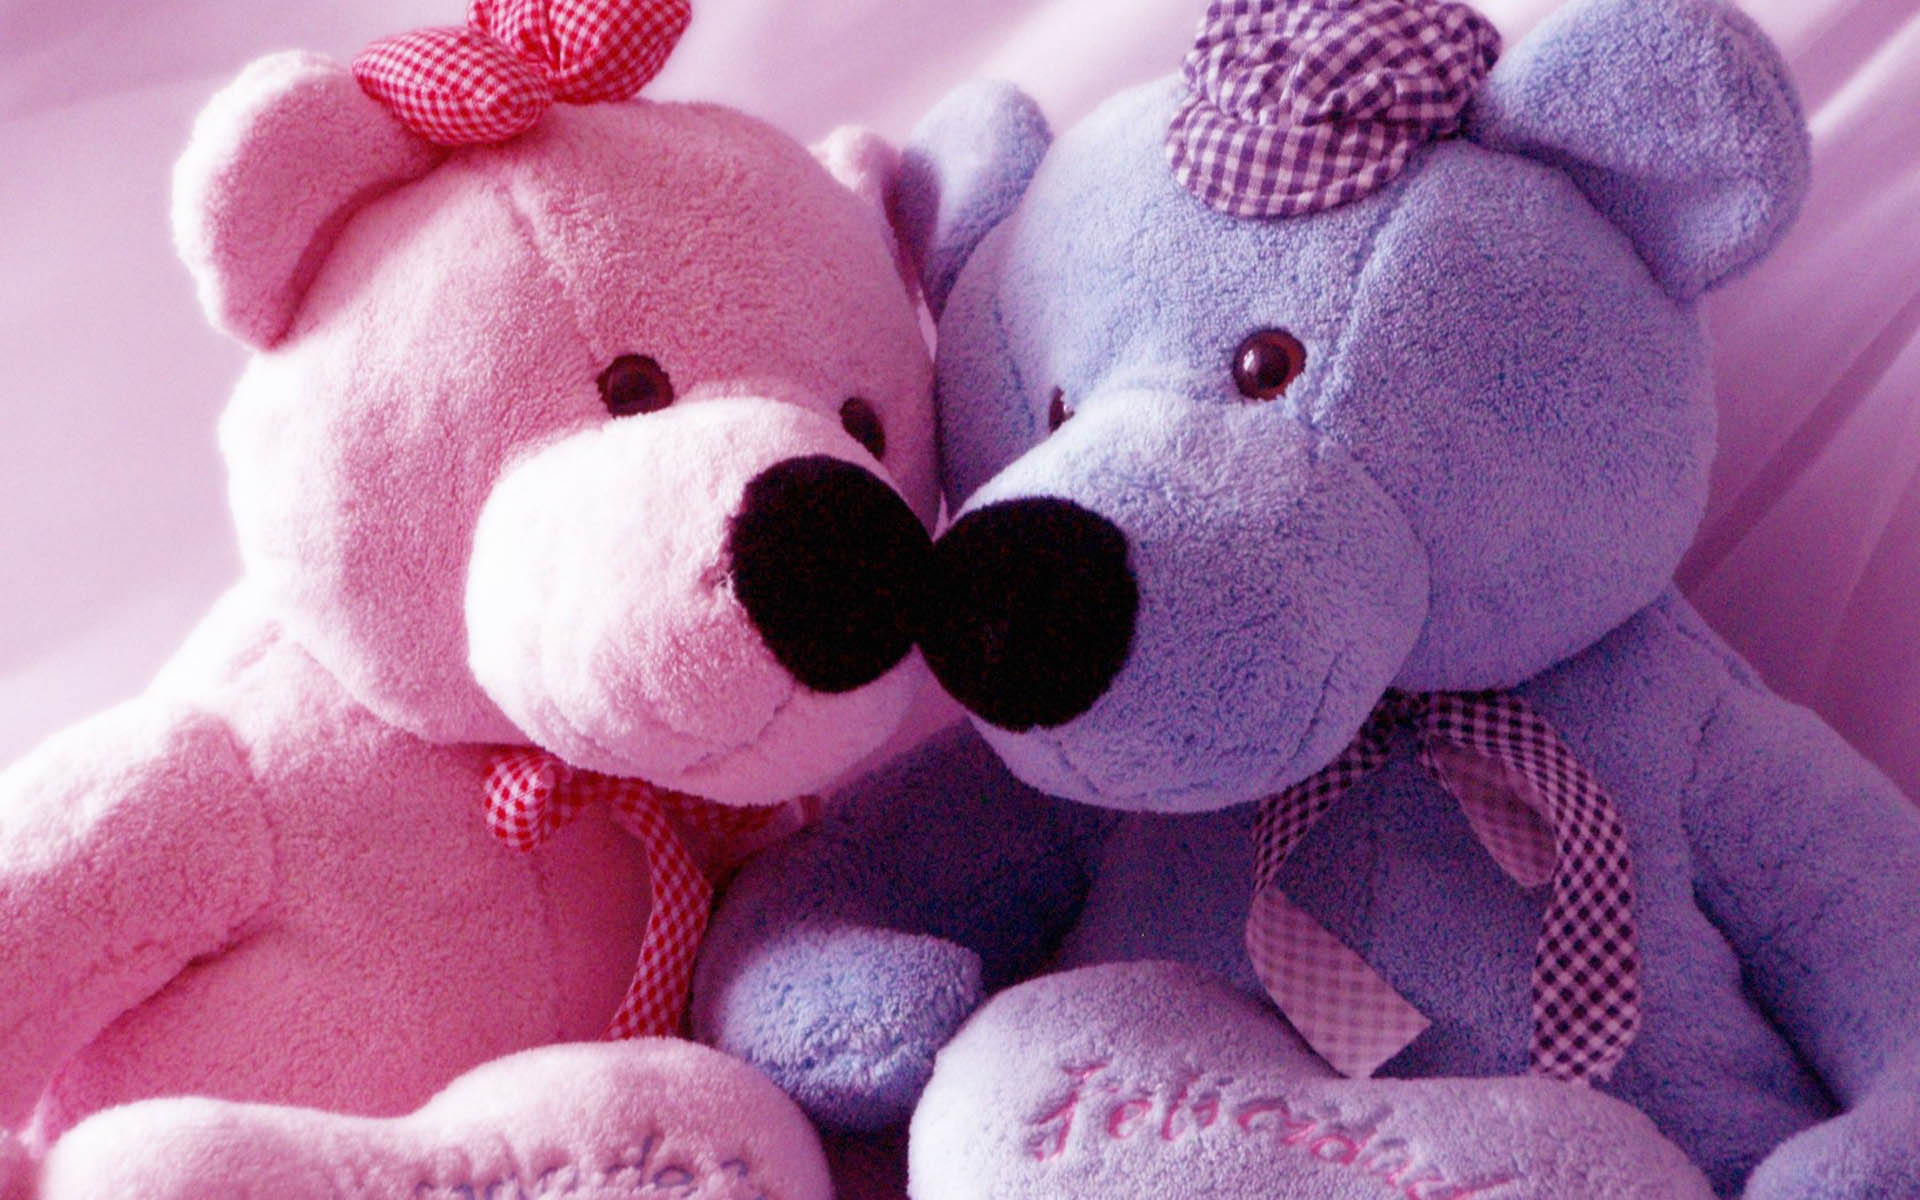 Download wallpaper for 2560x1440 resolution | Pink And Blue Teddy Bear  Computer | cute | Wallpaper Better